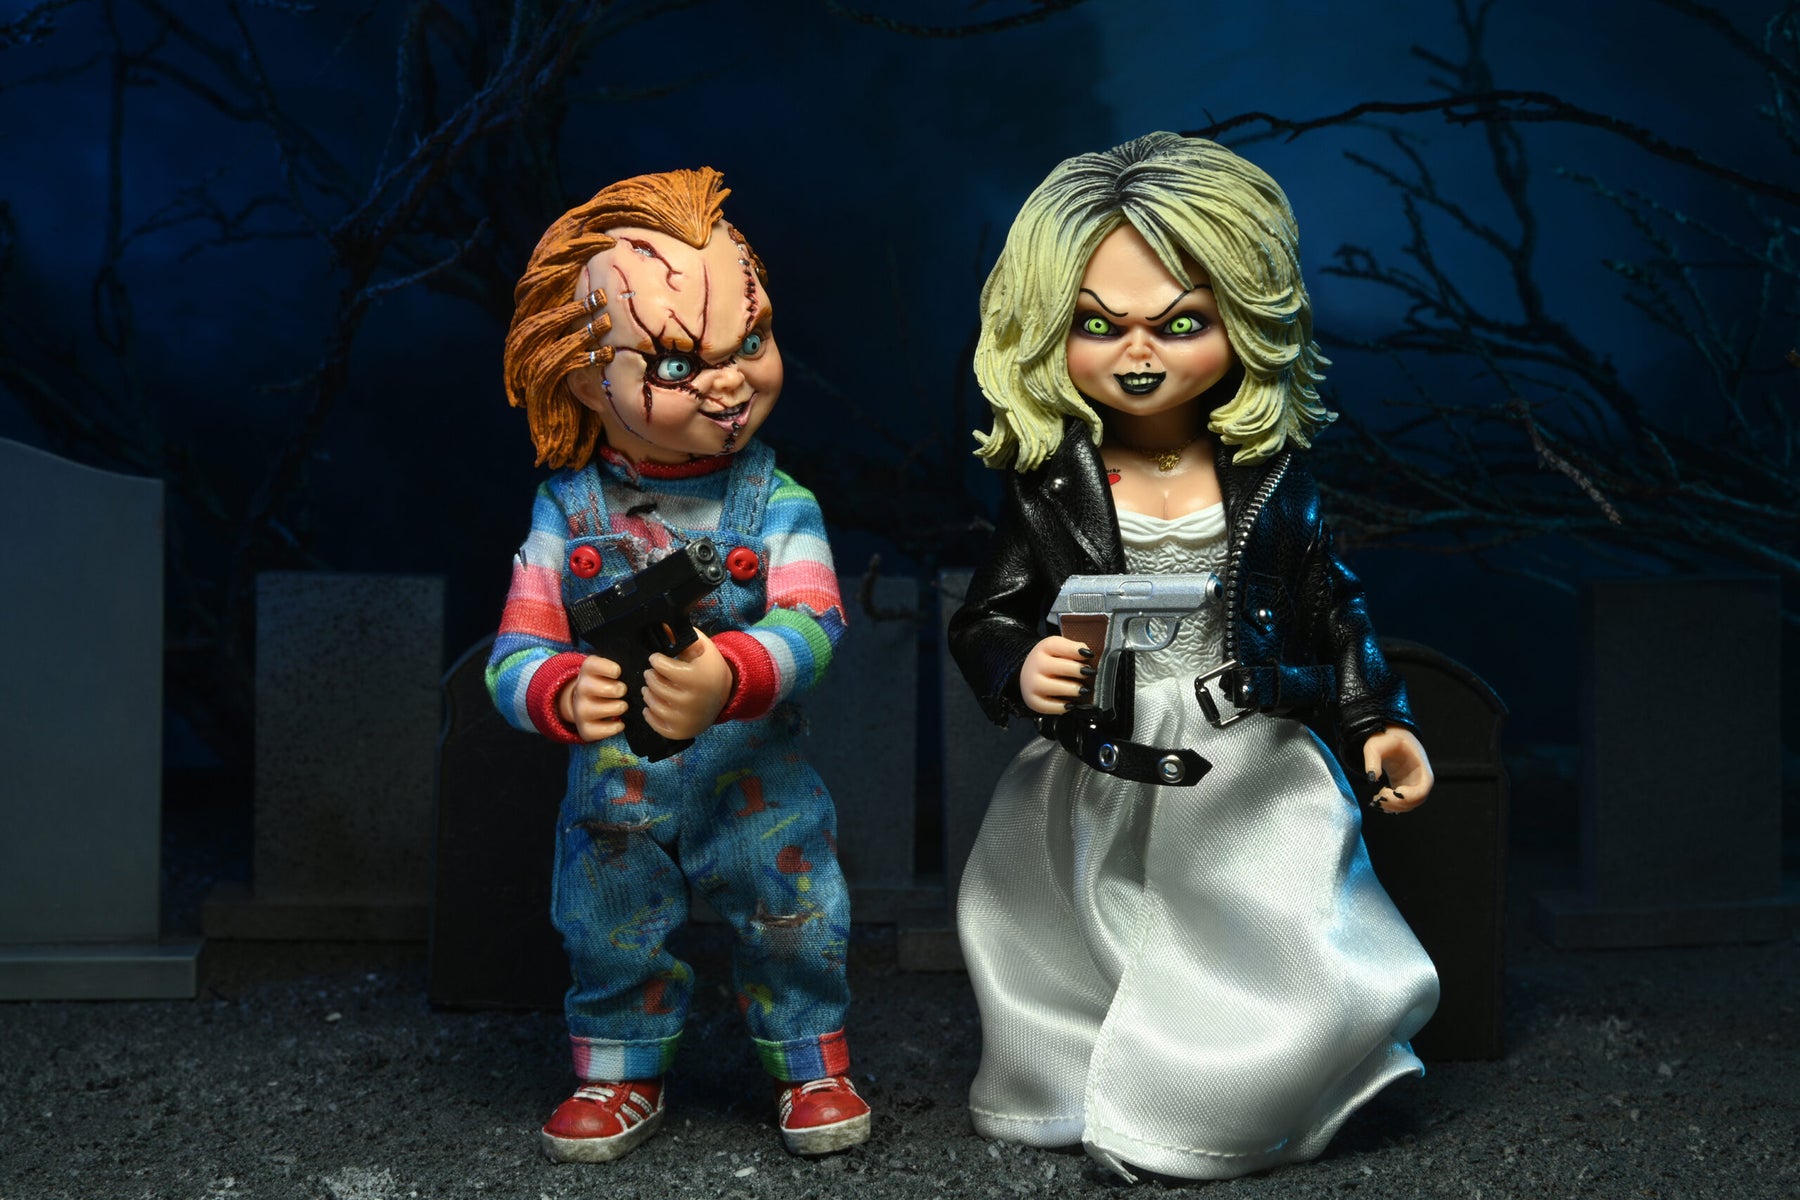 NECA - Bride of Chucky - Chucky & Tiffany 2-Pack 5.5" Clothed Action Figures